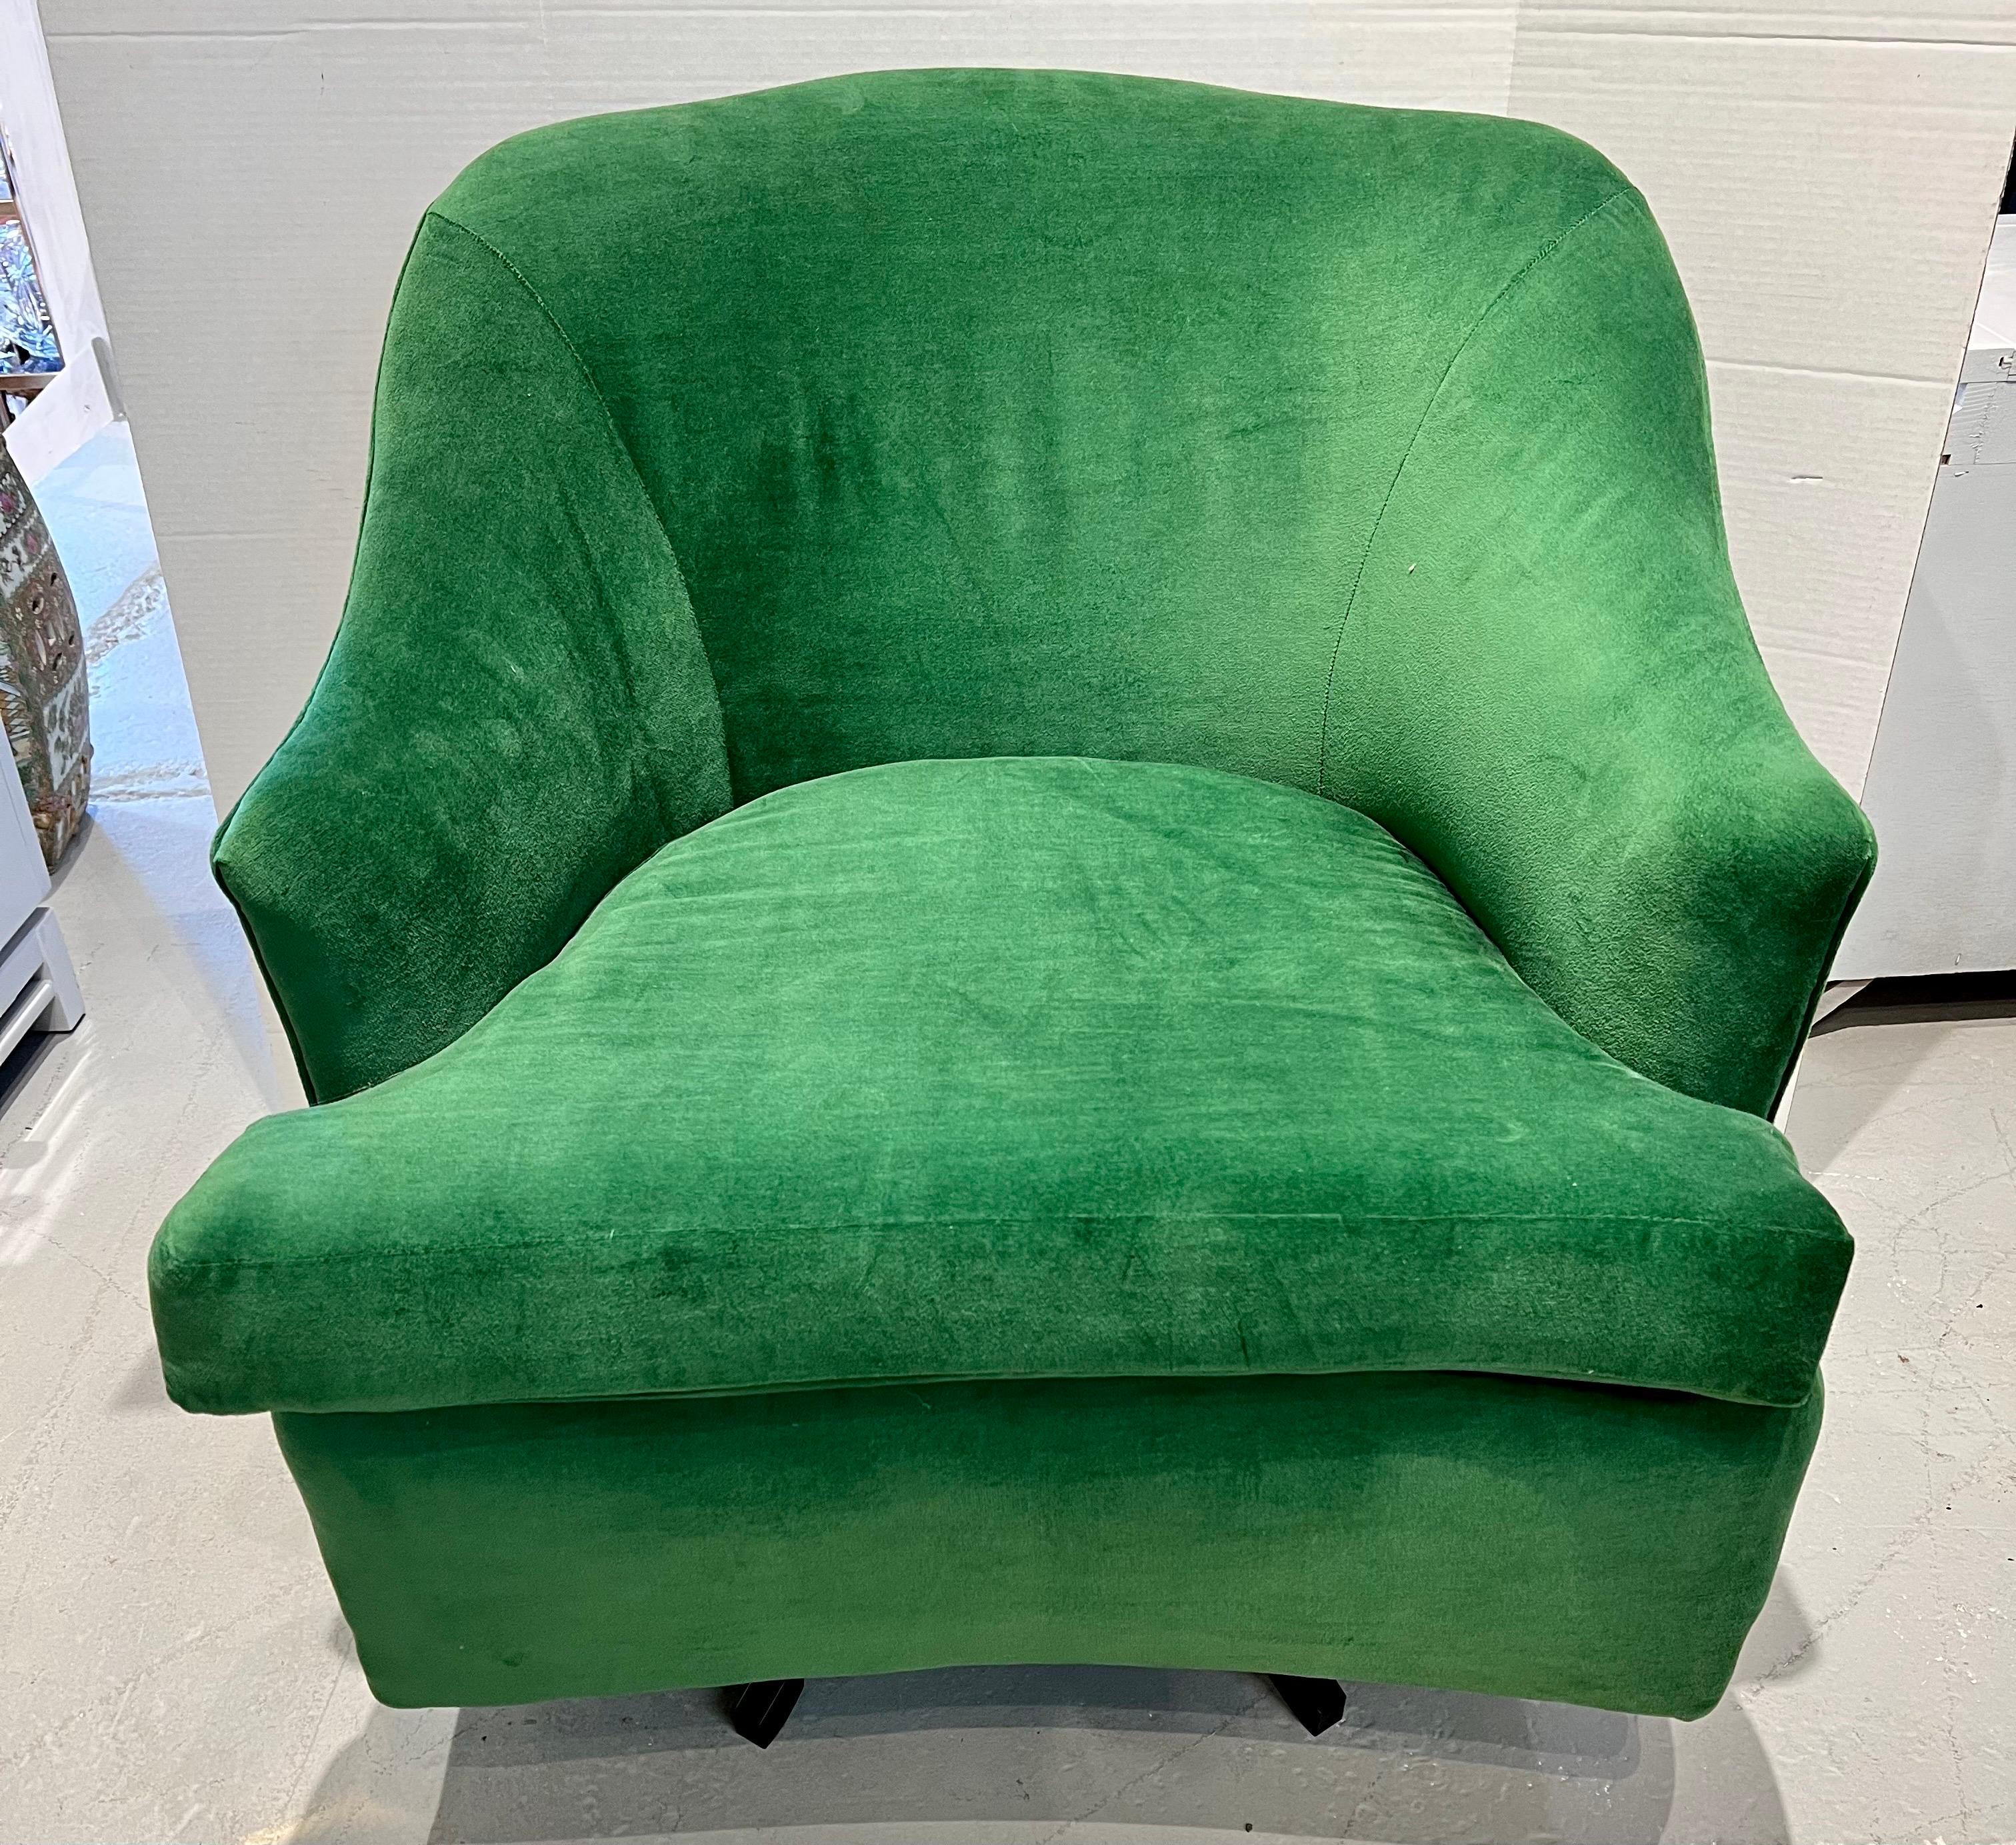 These mid-century barrel back swivel club chairs have recently been reupholstered in an emerald green Donghia velvet fabric and are super comfortable.